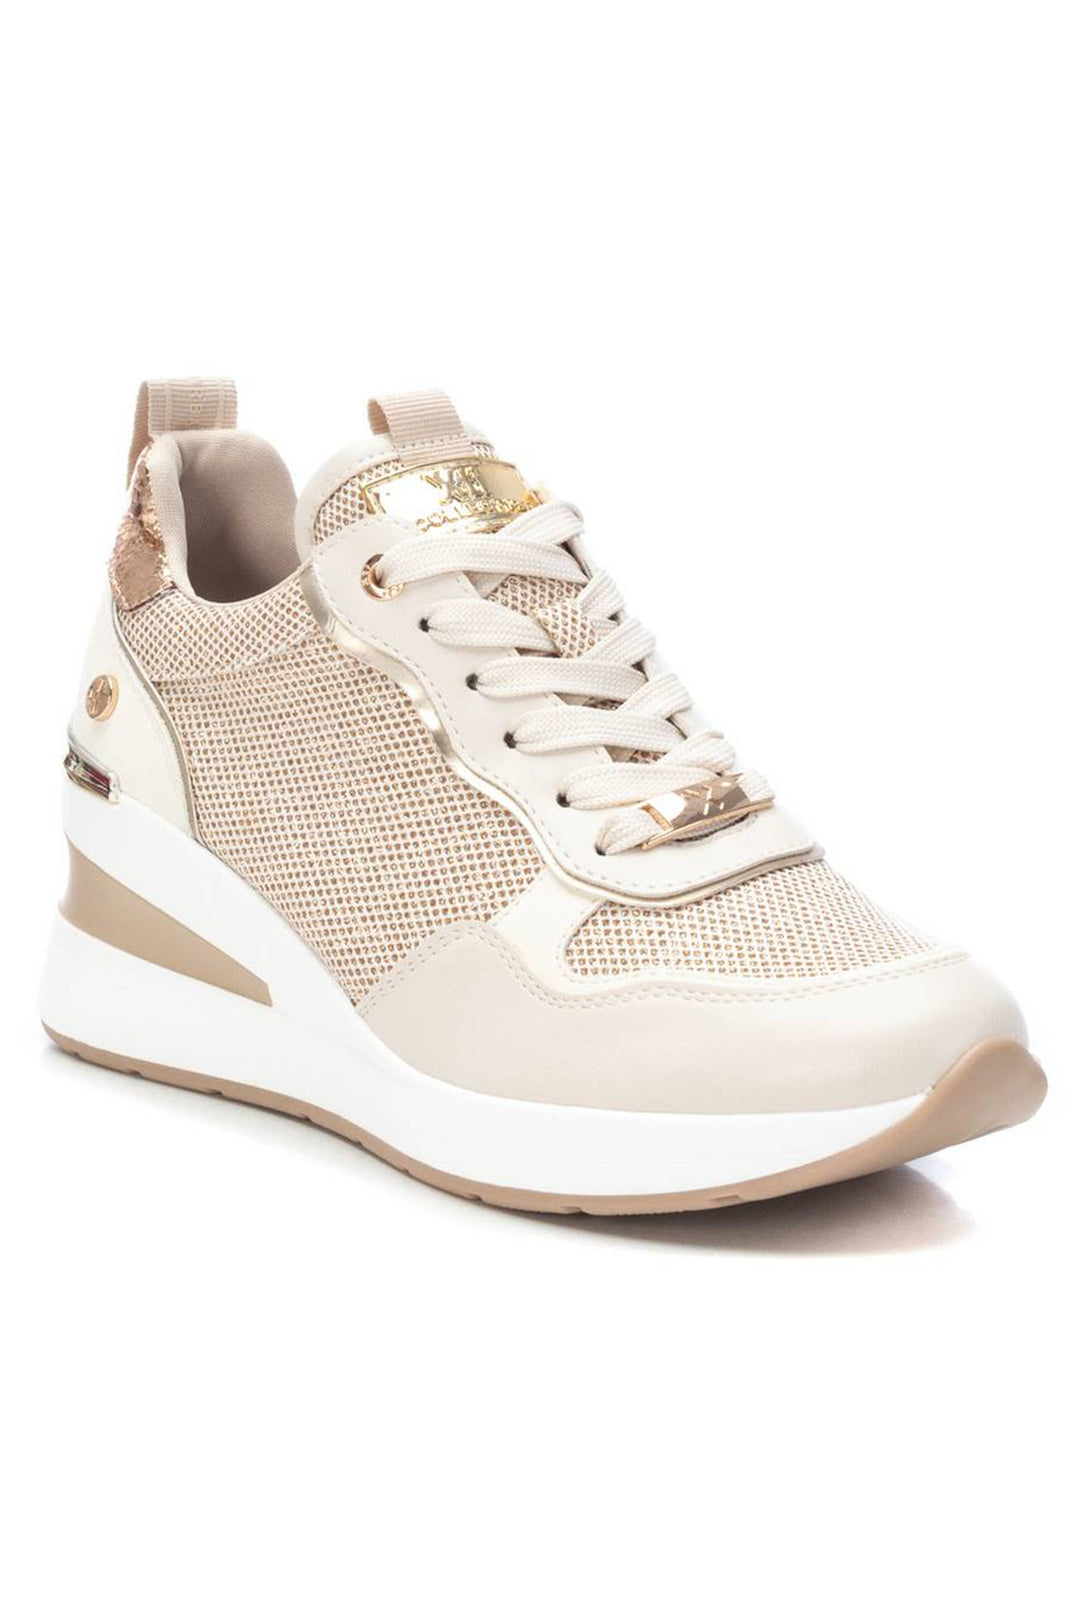 XTI 14240801 Gold Shimmer Wedge Trainers - Experience Boutique